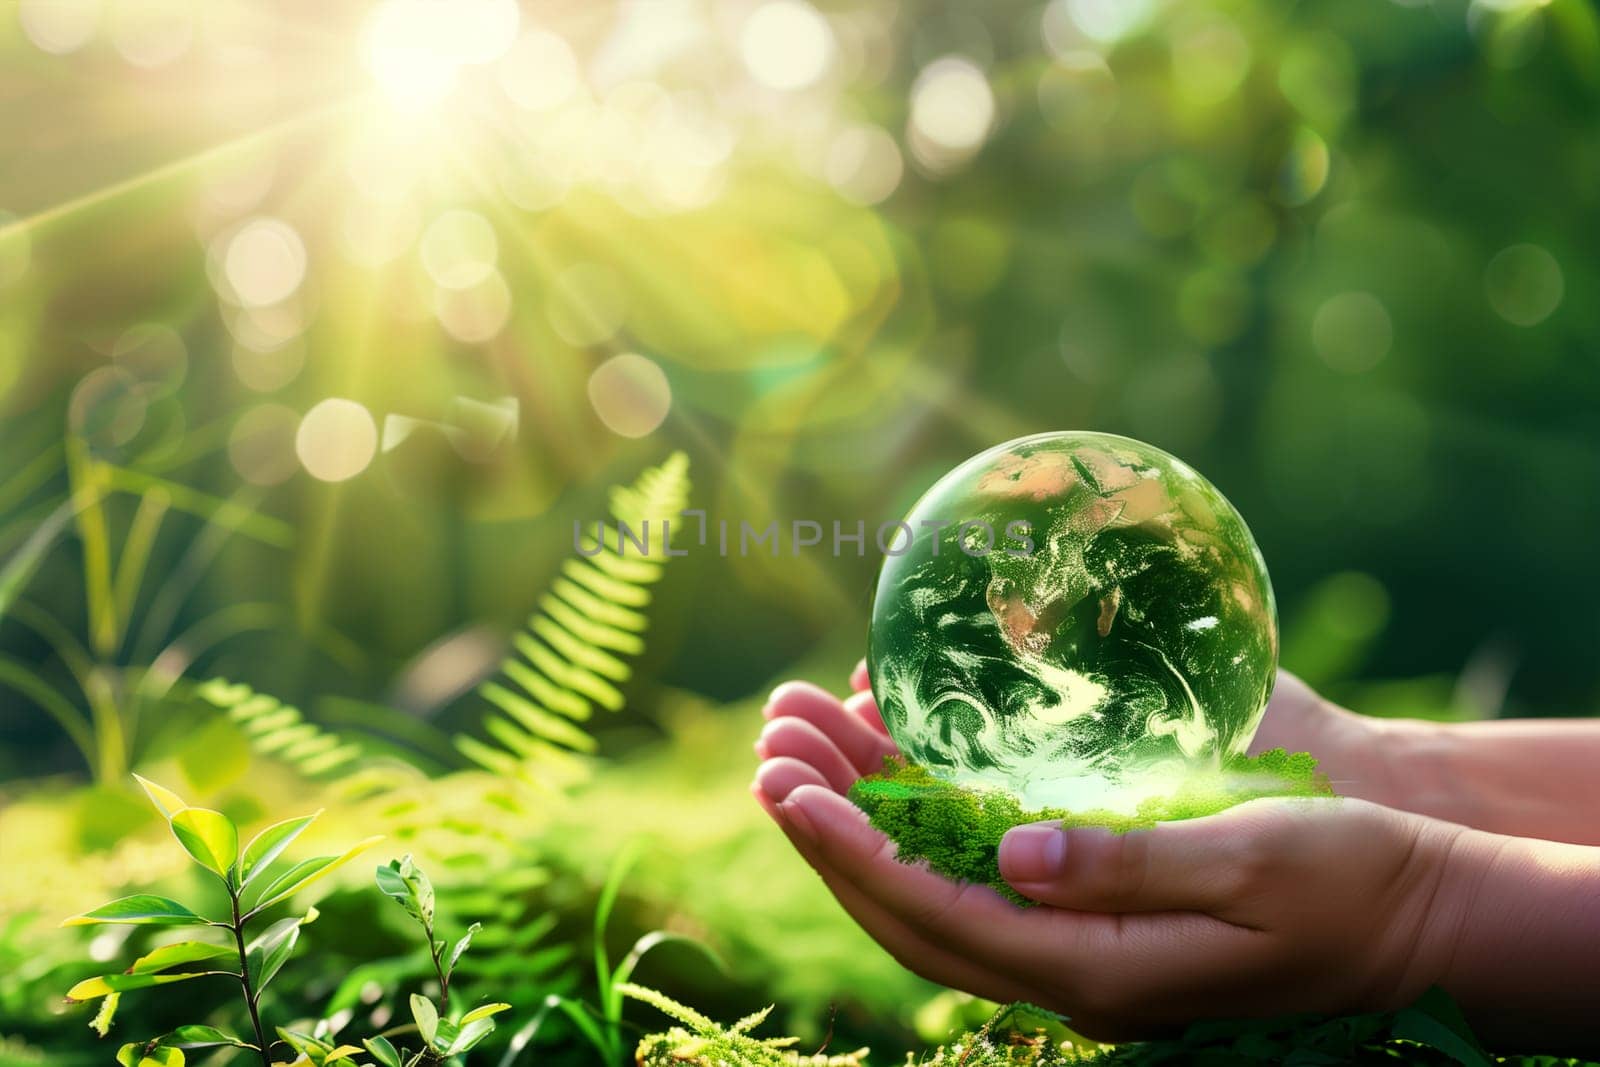 A child is holding a globe in their hands, showcasing their interest in the world and environment.